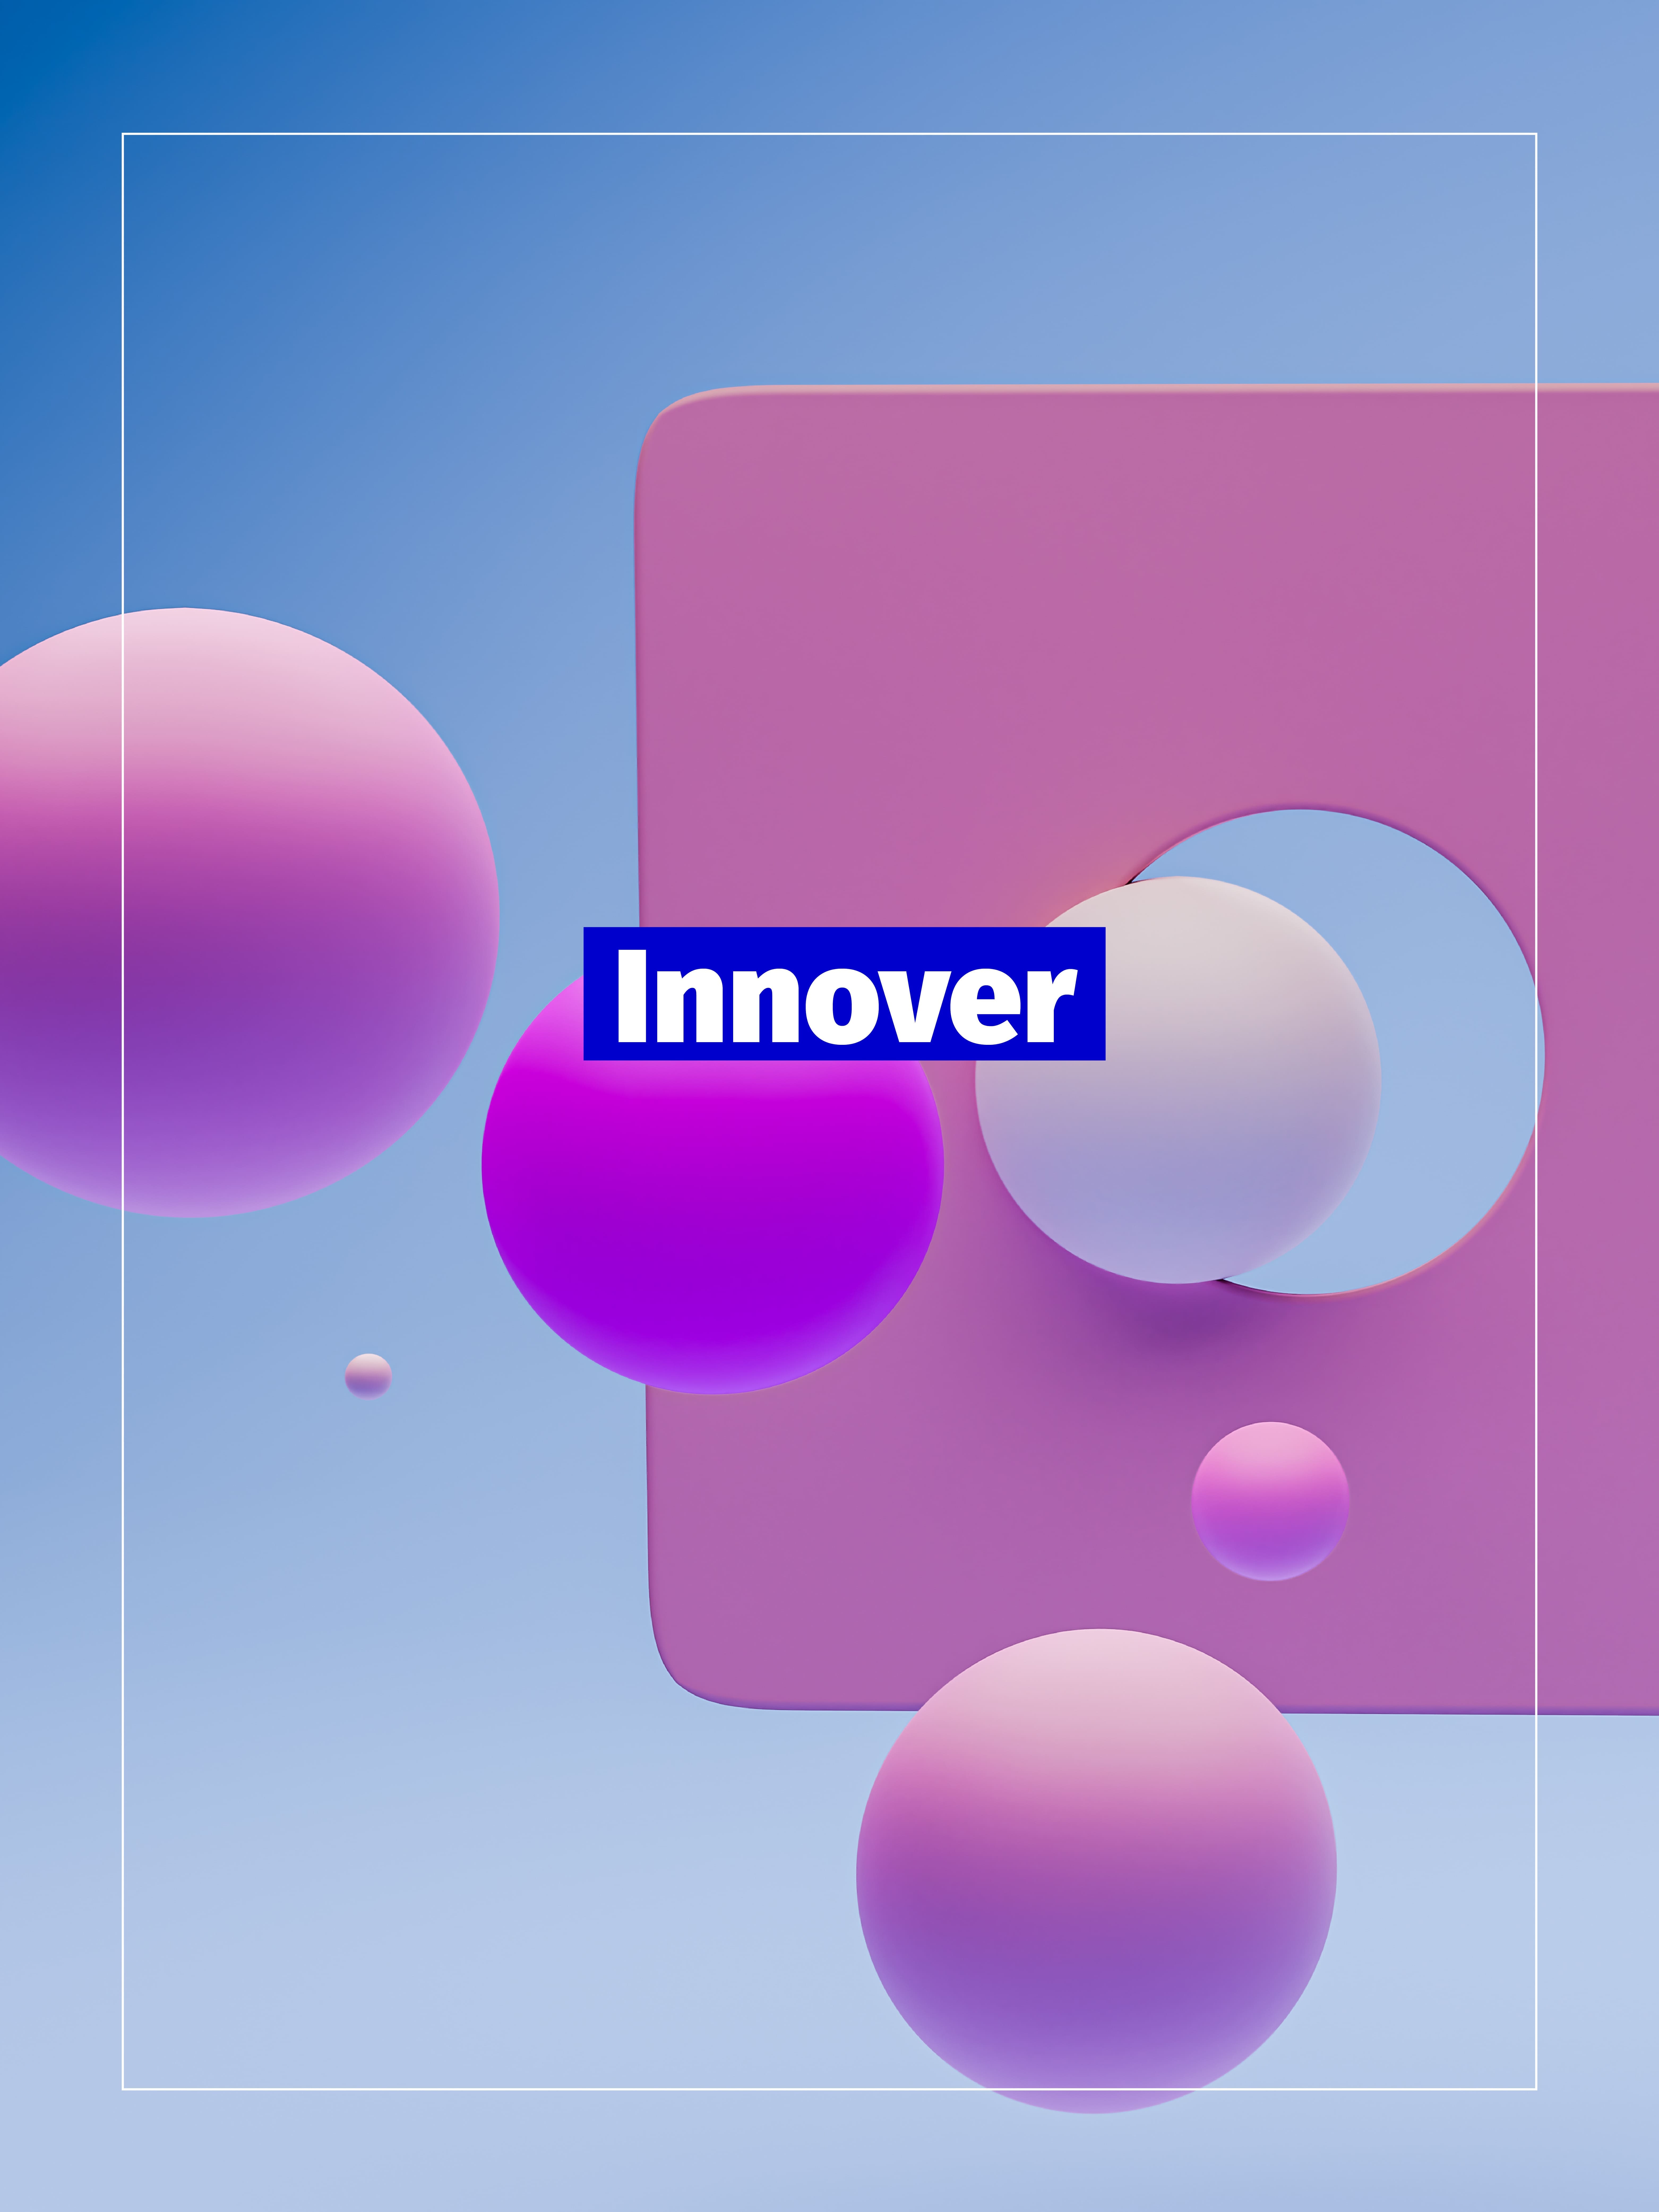 aide accompagnement innovation